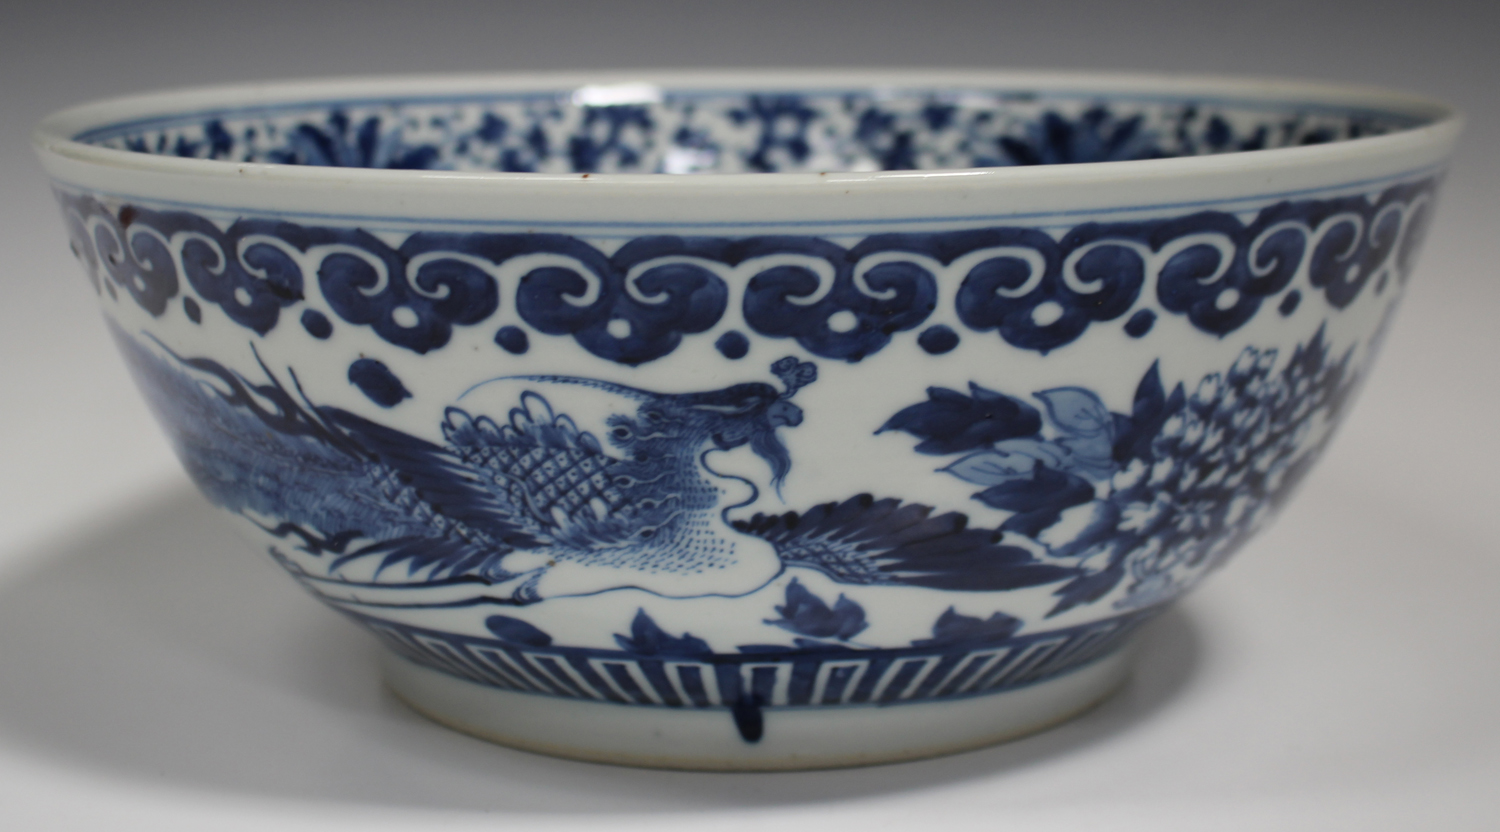 A Chinese blue and white porcelain punch bowl, late 19th century, the exterior painted with a pair